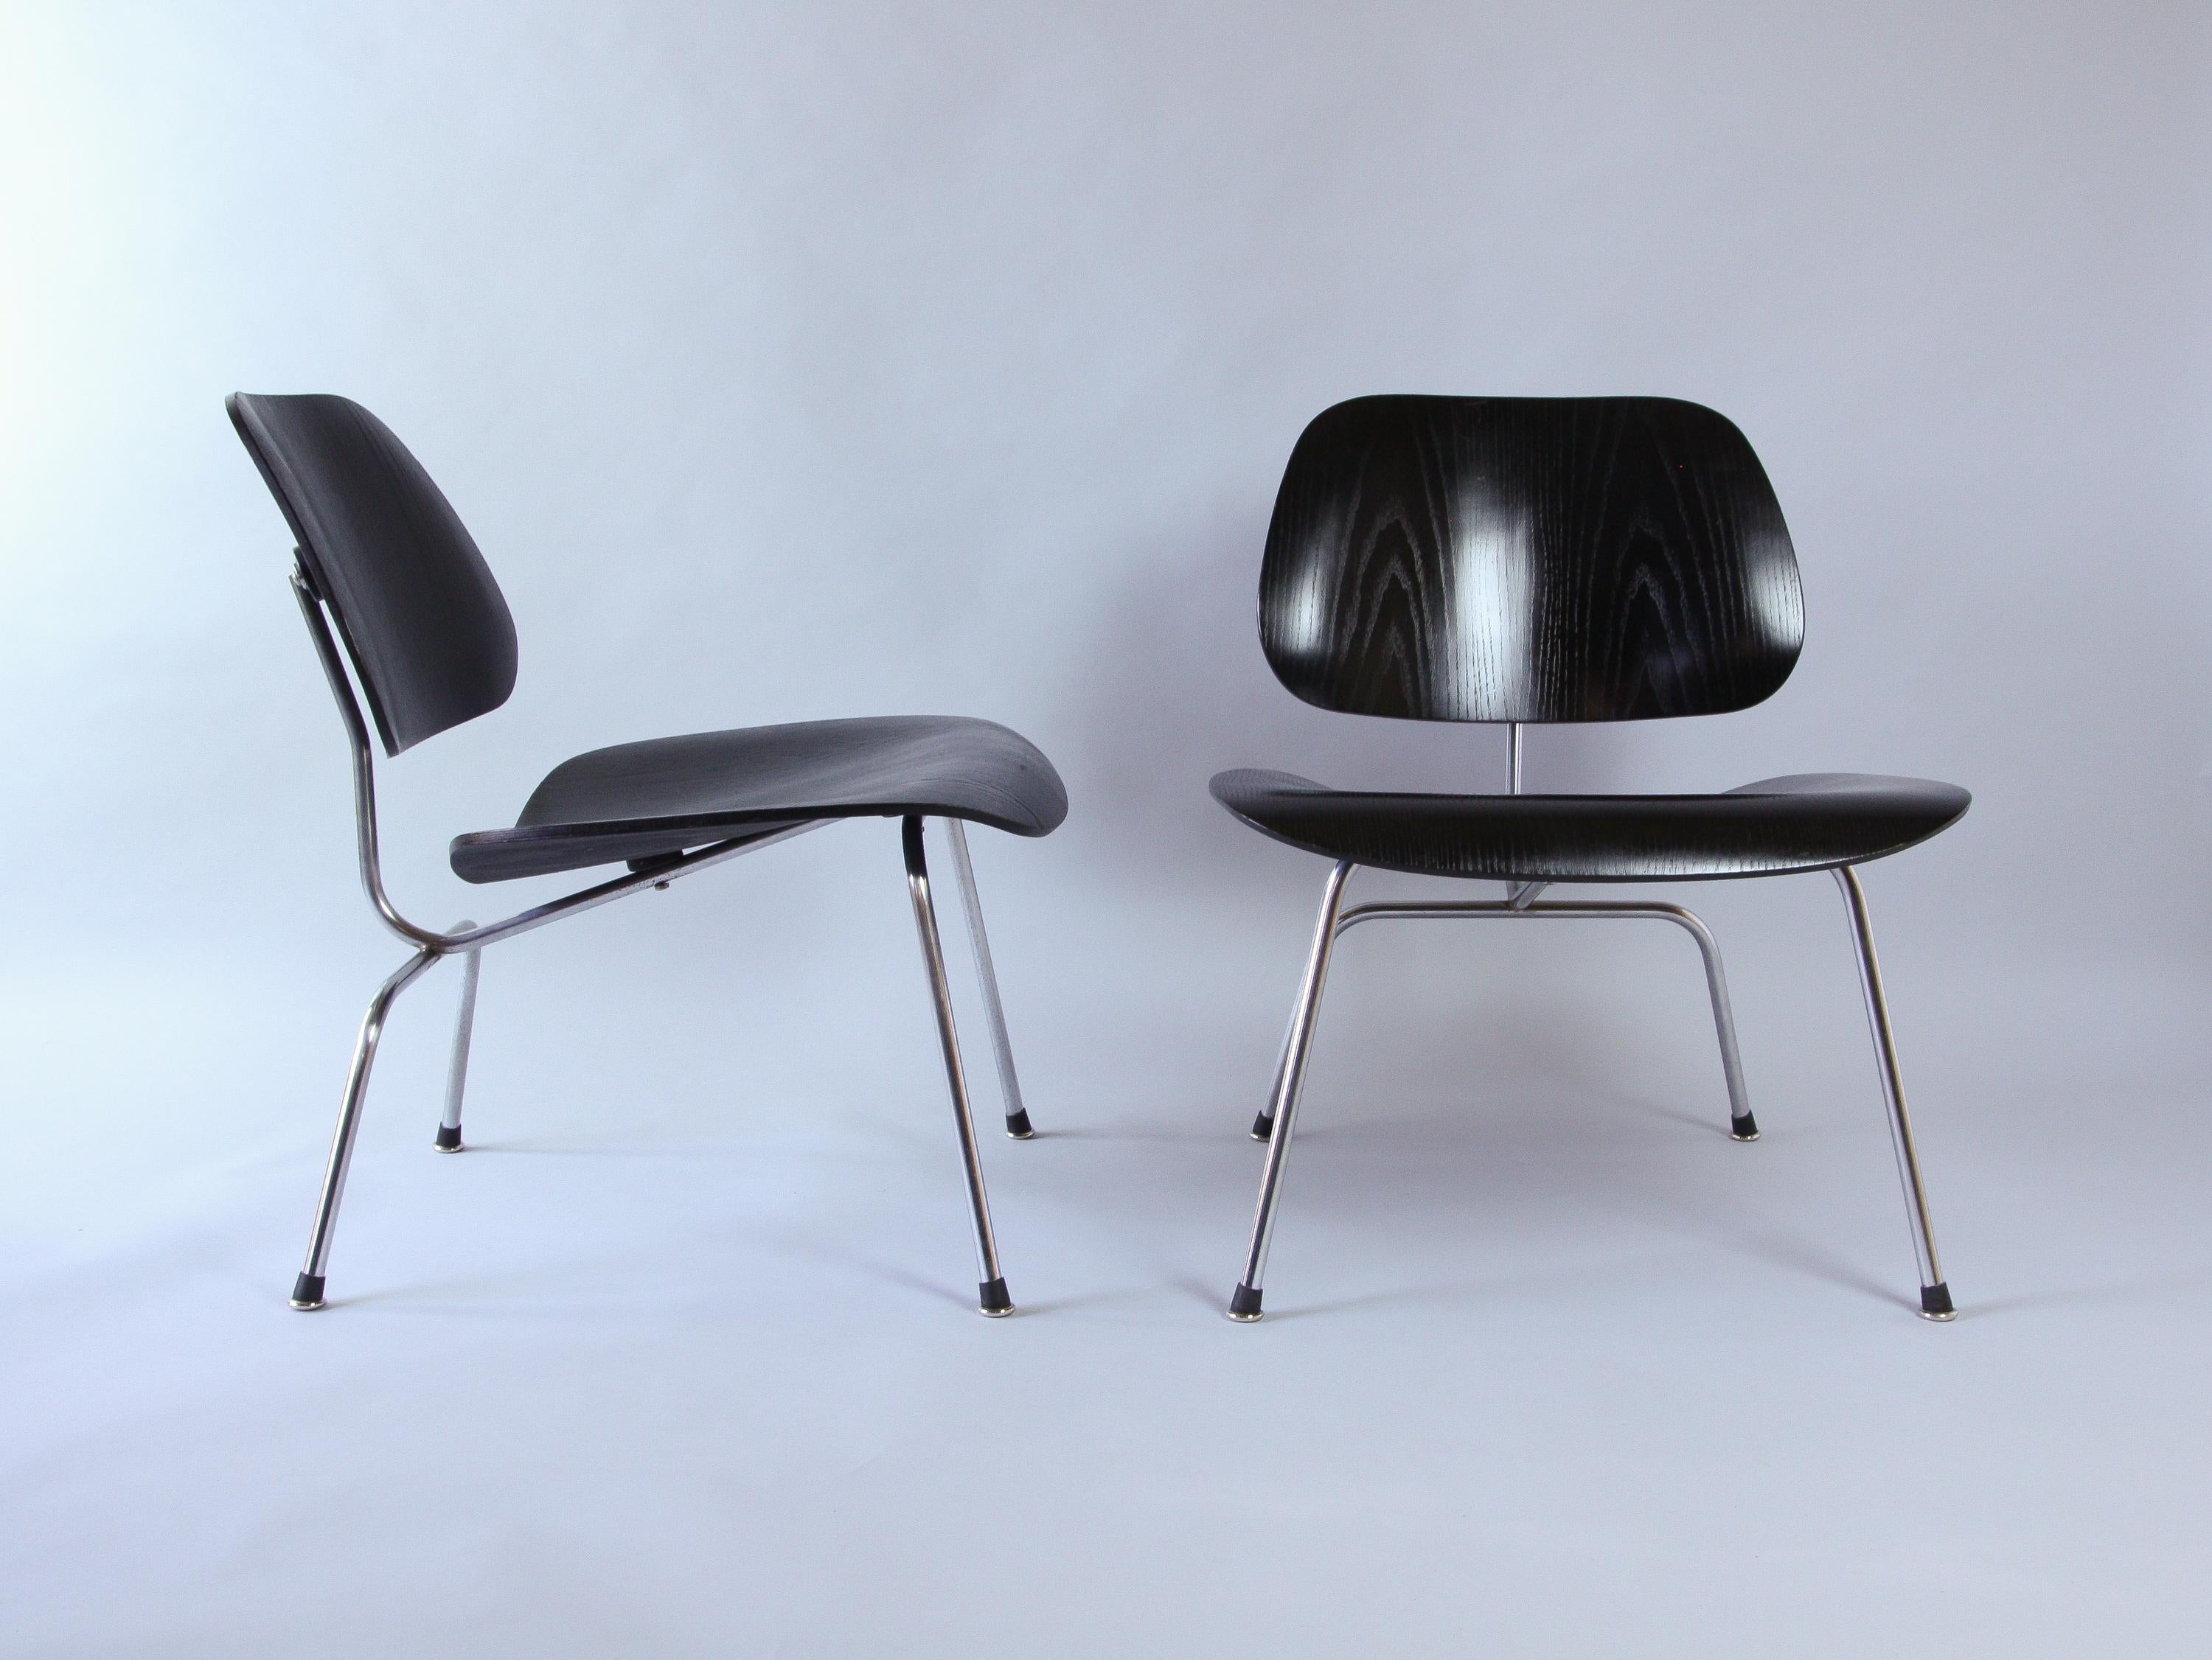 Swiss Pair of Eames LCM Chairs by Contura in Black and Chrome